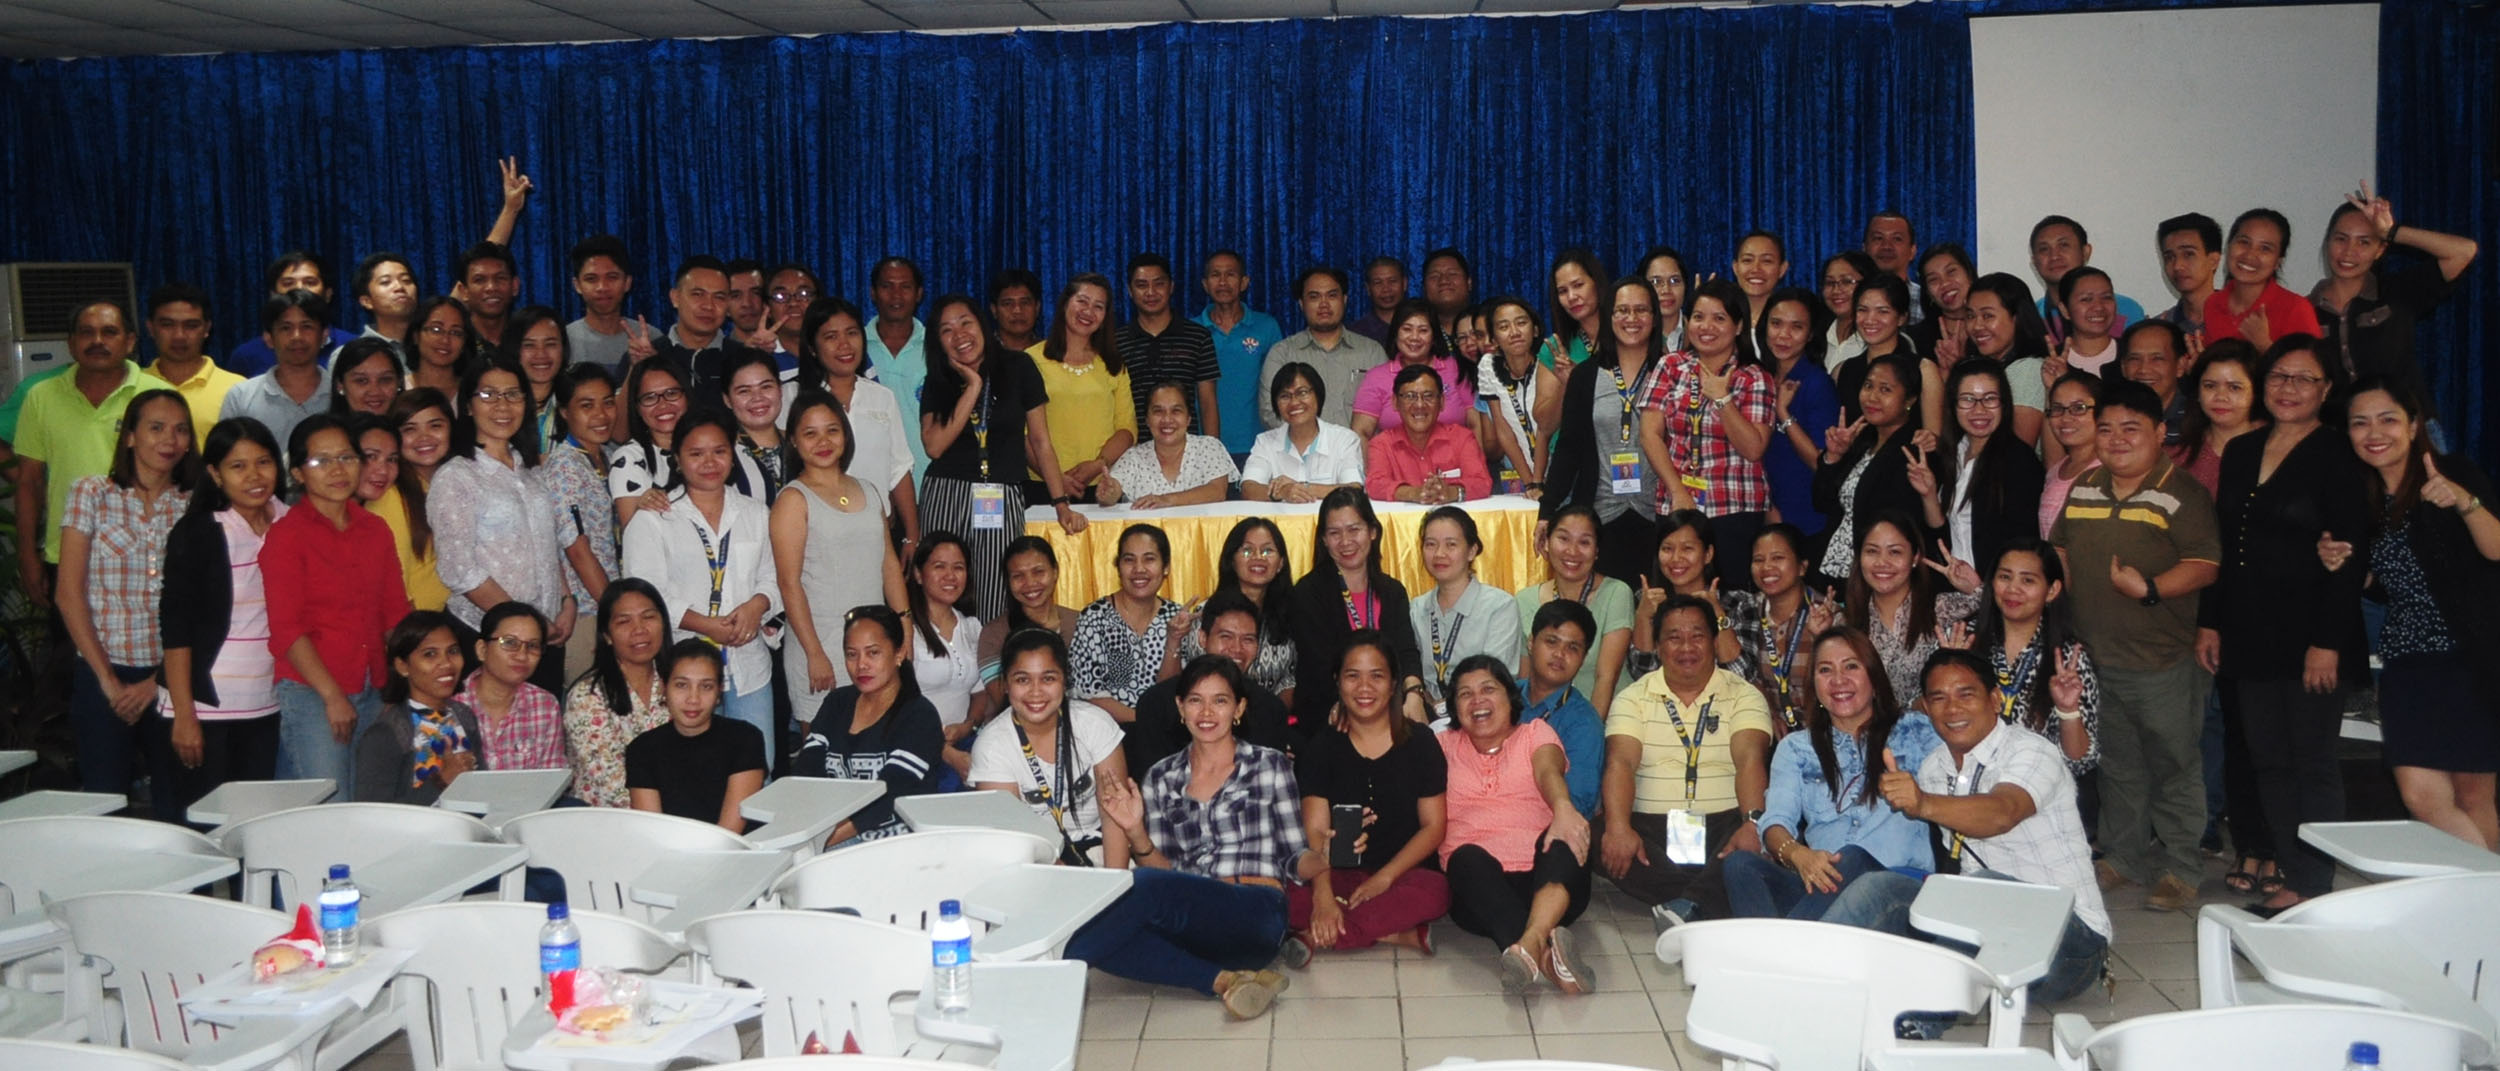 the participants pose for the camera after completing the two-day seminar workshop.